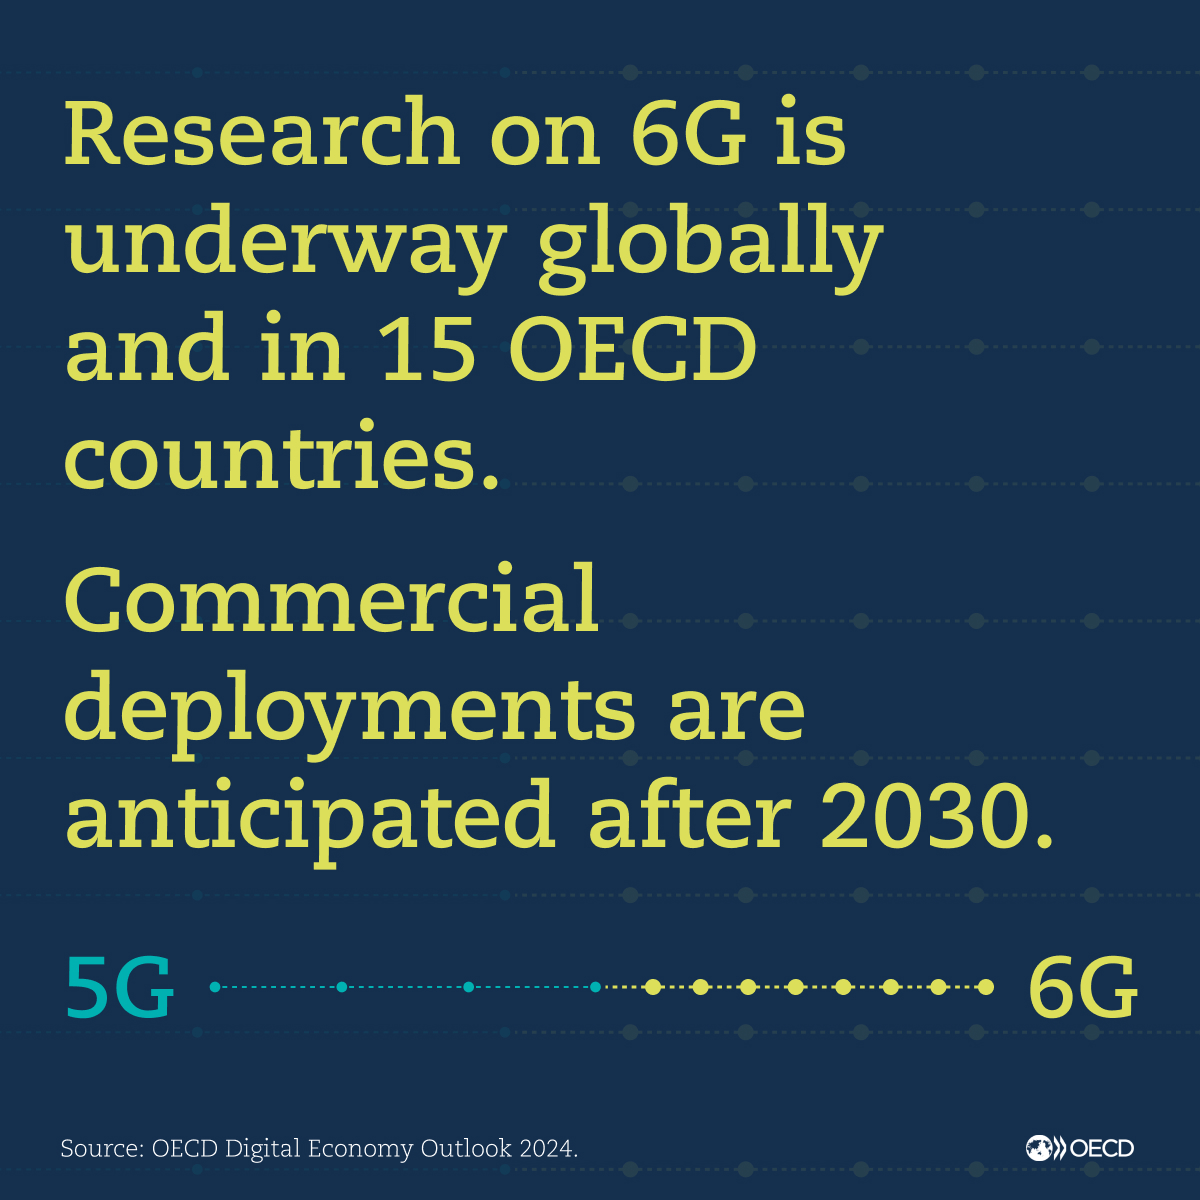 🚀 6G could bring revolutionary advancements to communication & tech. The road to #6G will likely be shaped by: 🔹 Overarching policy objectives 🔹 Spectrum management 🔹 Technological advancements 🔹 Evolution of business models 🆕 Insights: oe.cd/il/deo-sp1 #OECDdigital